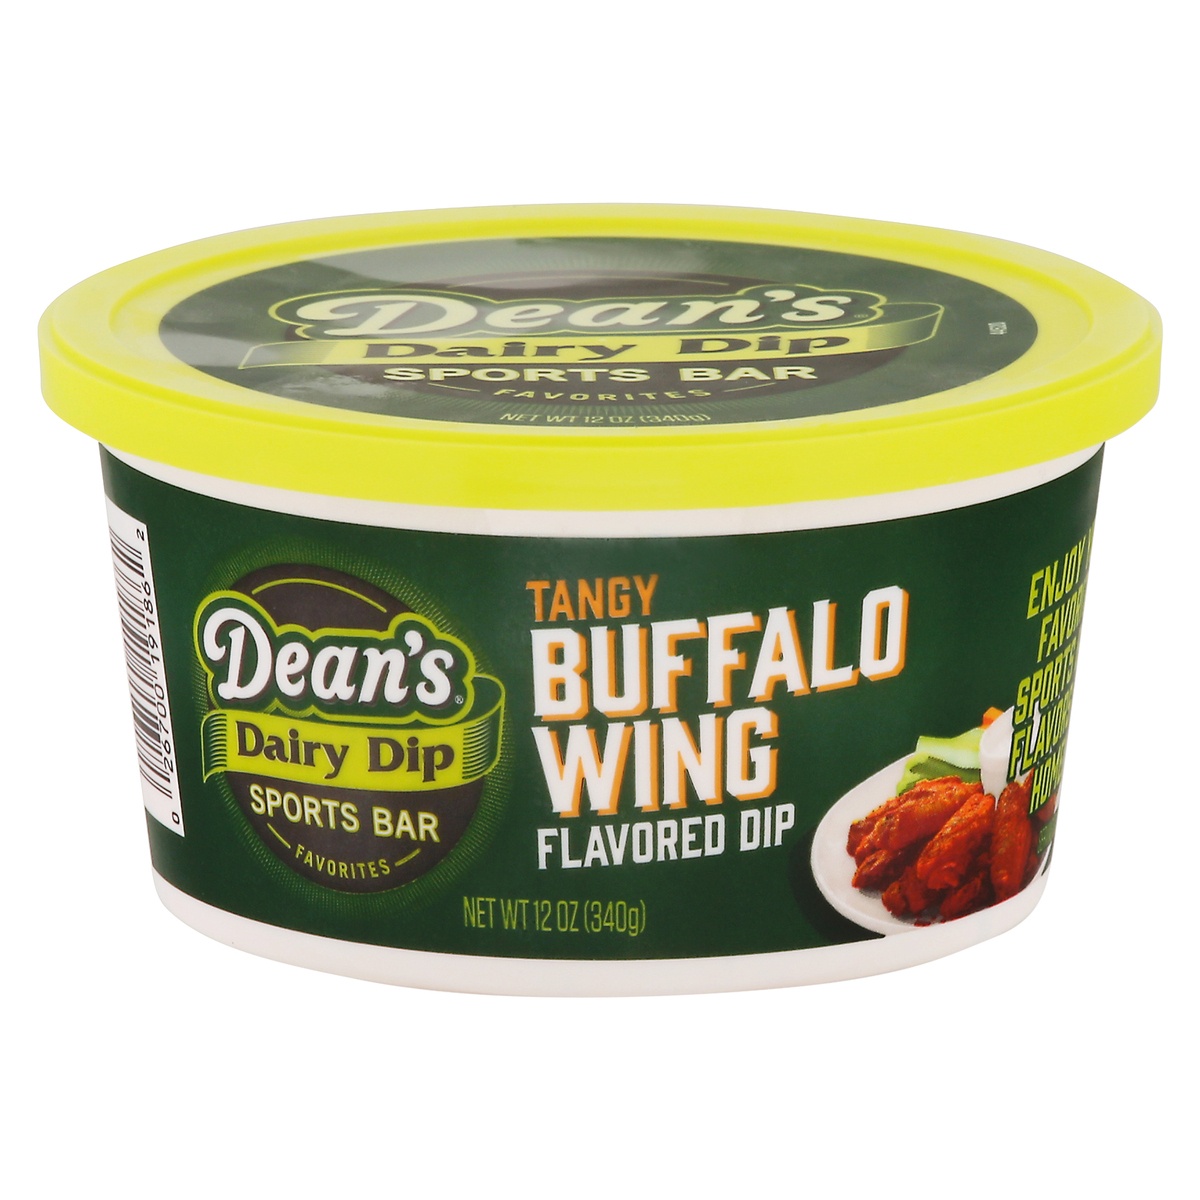 slide 1 of 1, Dean's Sports Bar Tangy Buffalo Wing Flavored Dip, 12 oz